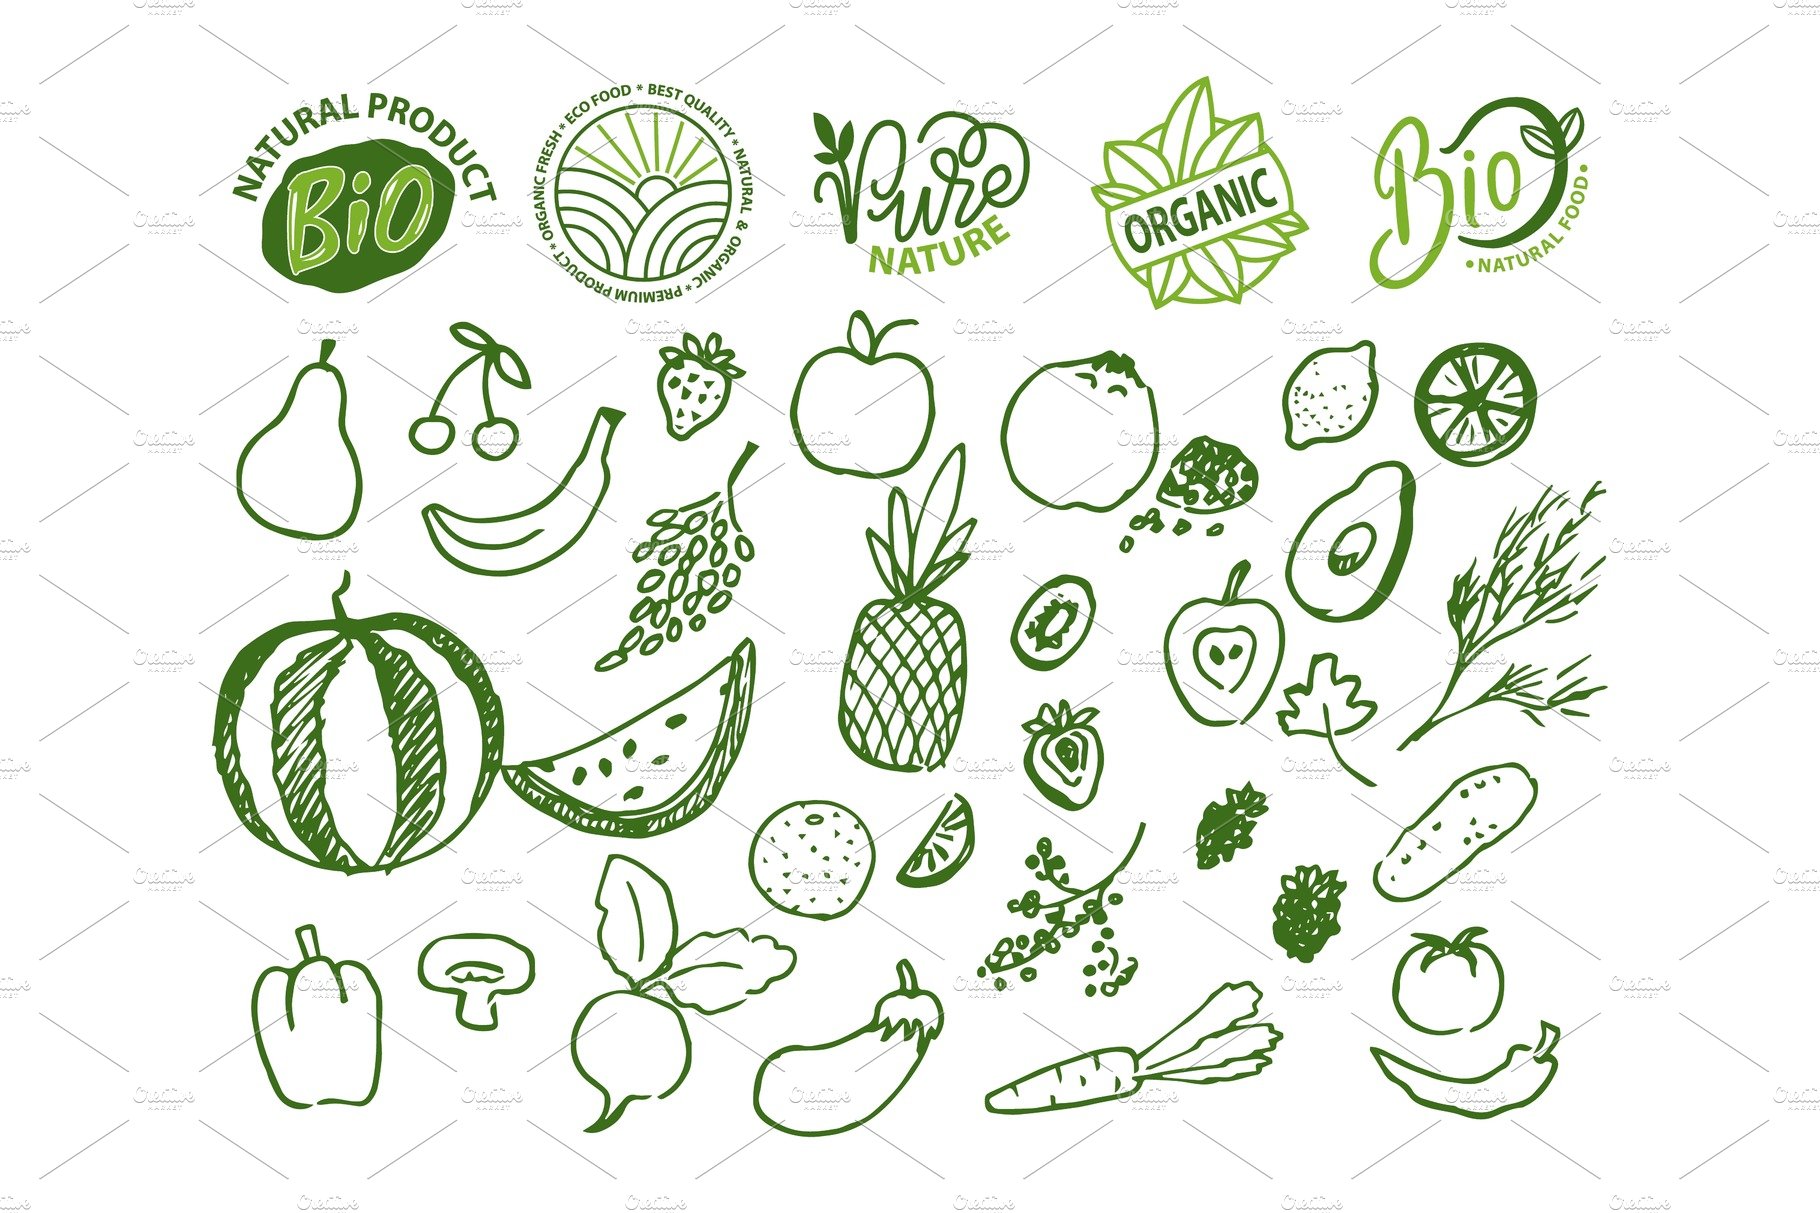 Bio Food and Ingredients, Fruits and cover image.